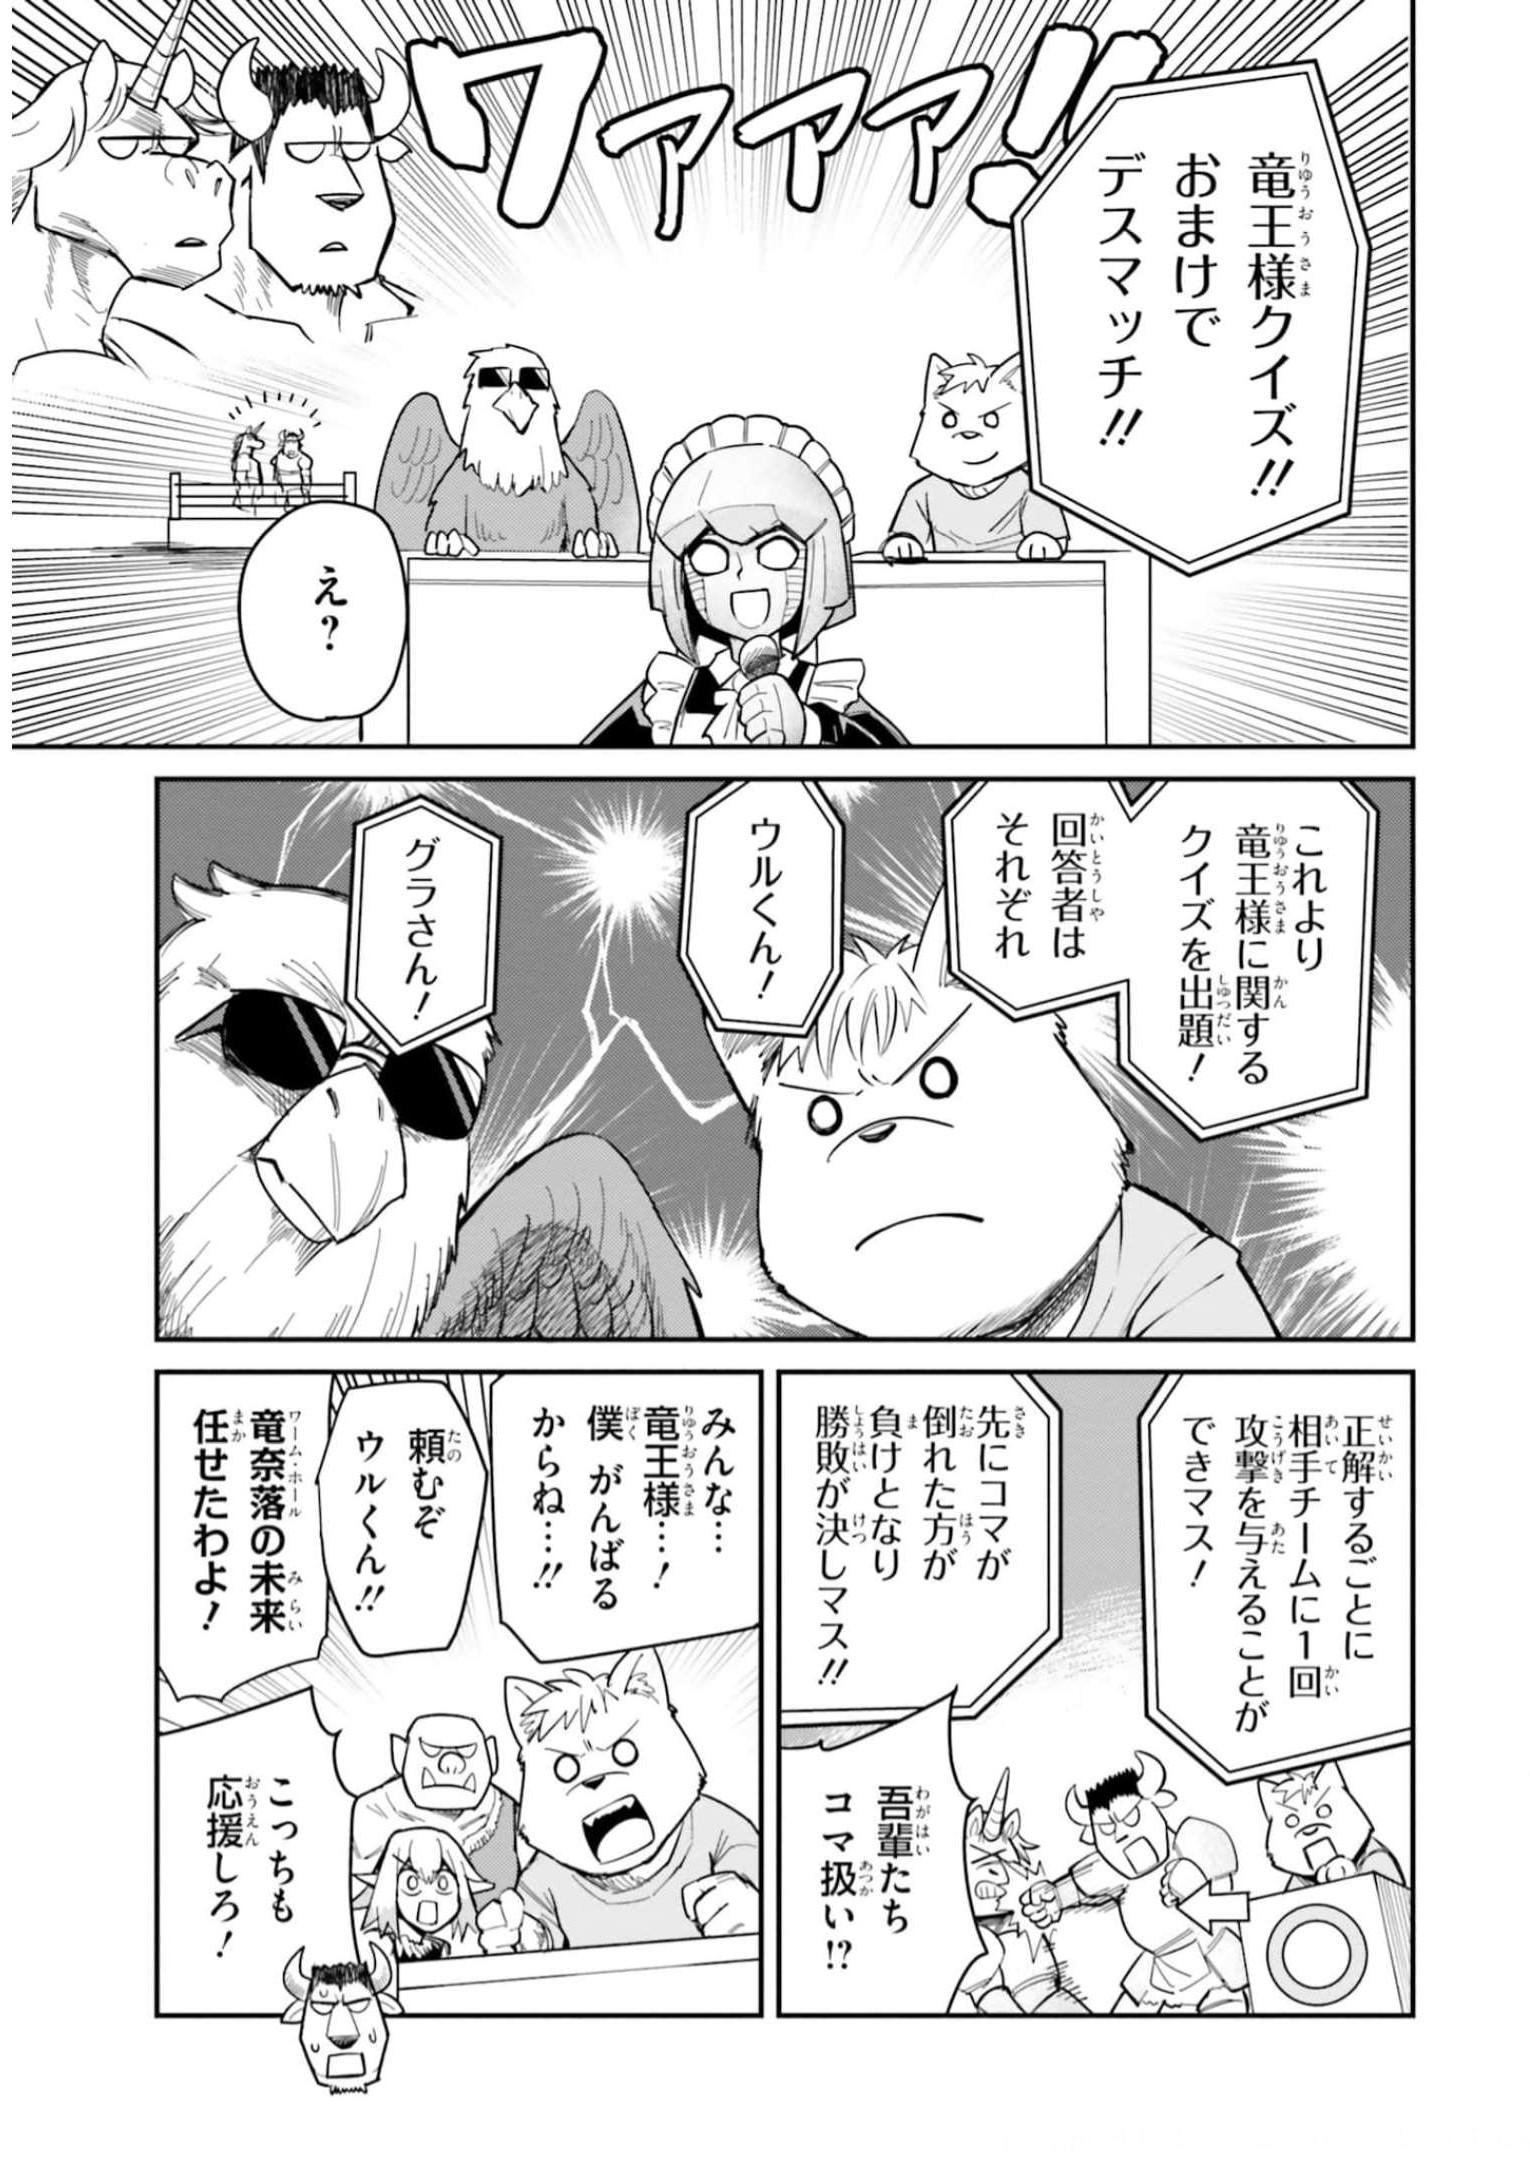 Dungeon Friends Forever Dungeon’s Childhood Friend ダンジョンの幼なじみ 第21話 - Page 4